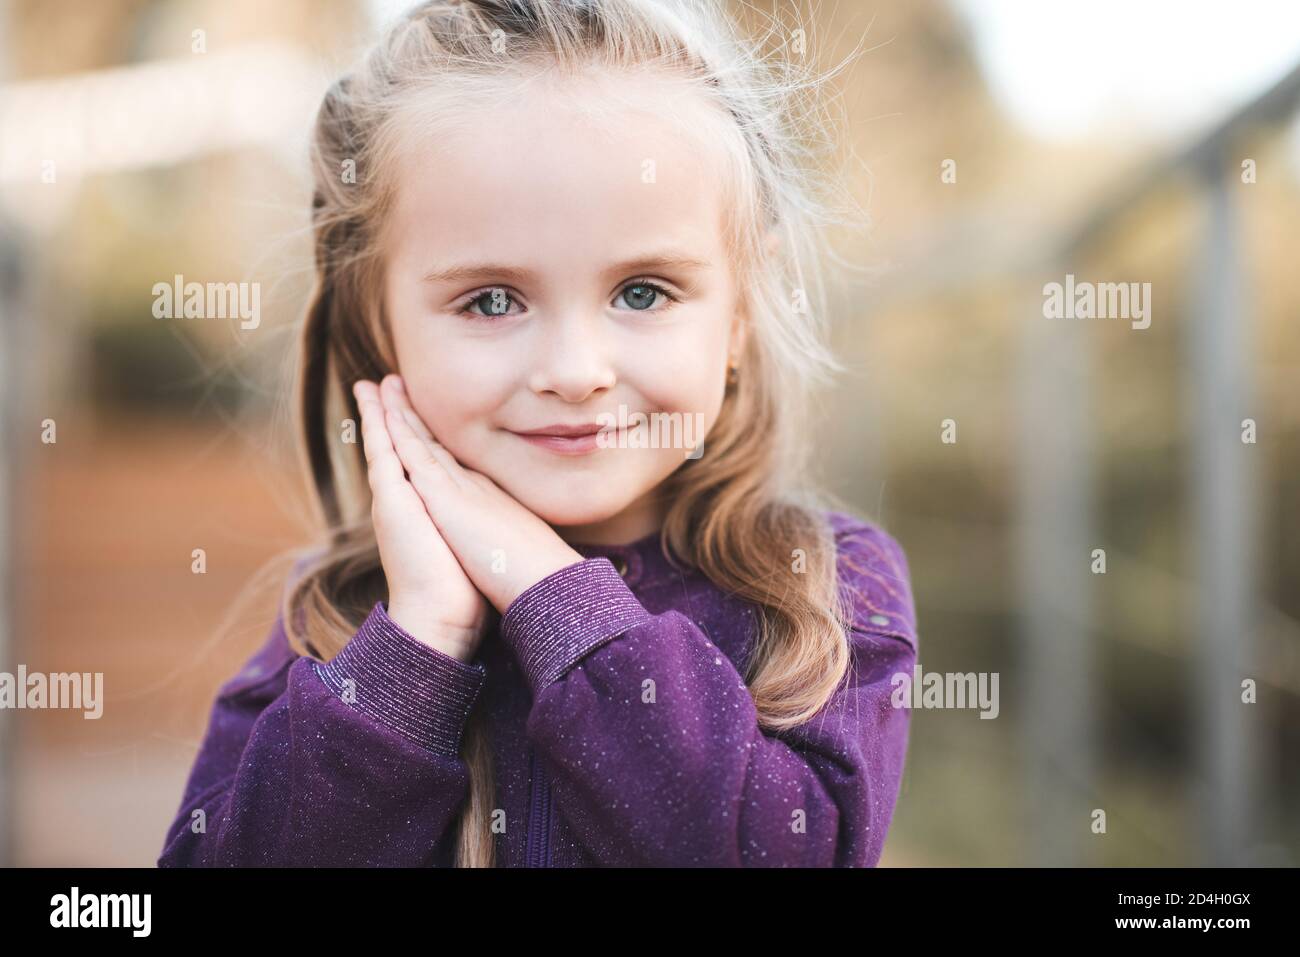 Cute baby girl 3-4 year old wearing stylish white dress sitting in bed in  room. Looking at camera Stock Photo - Alamy